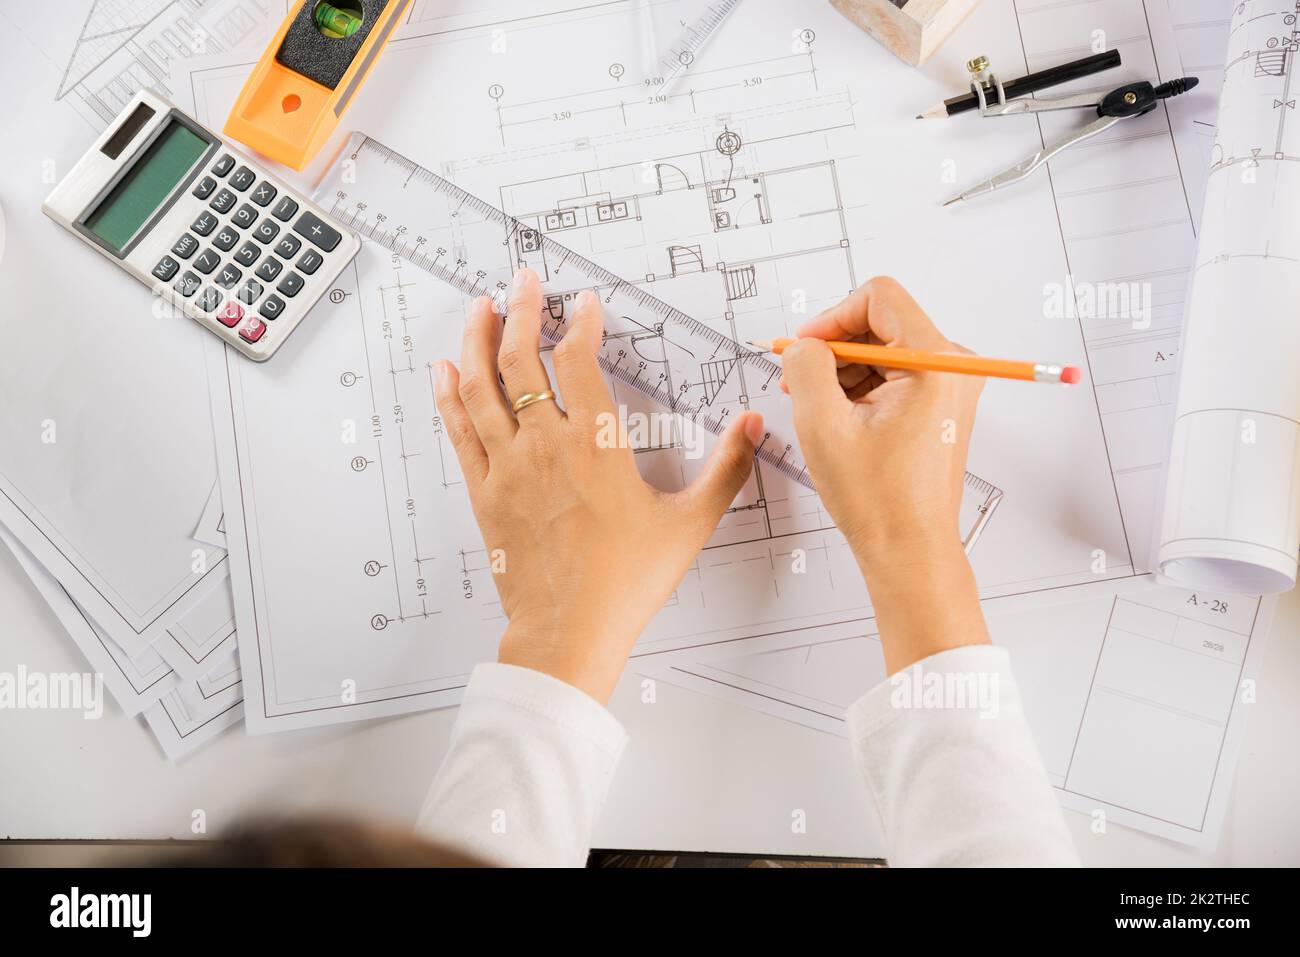 Architect drawing with ruler on house plan blueprint paper for repair tools on table Stock Photo